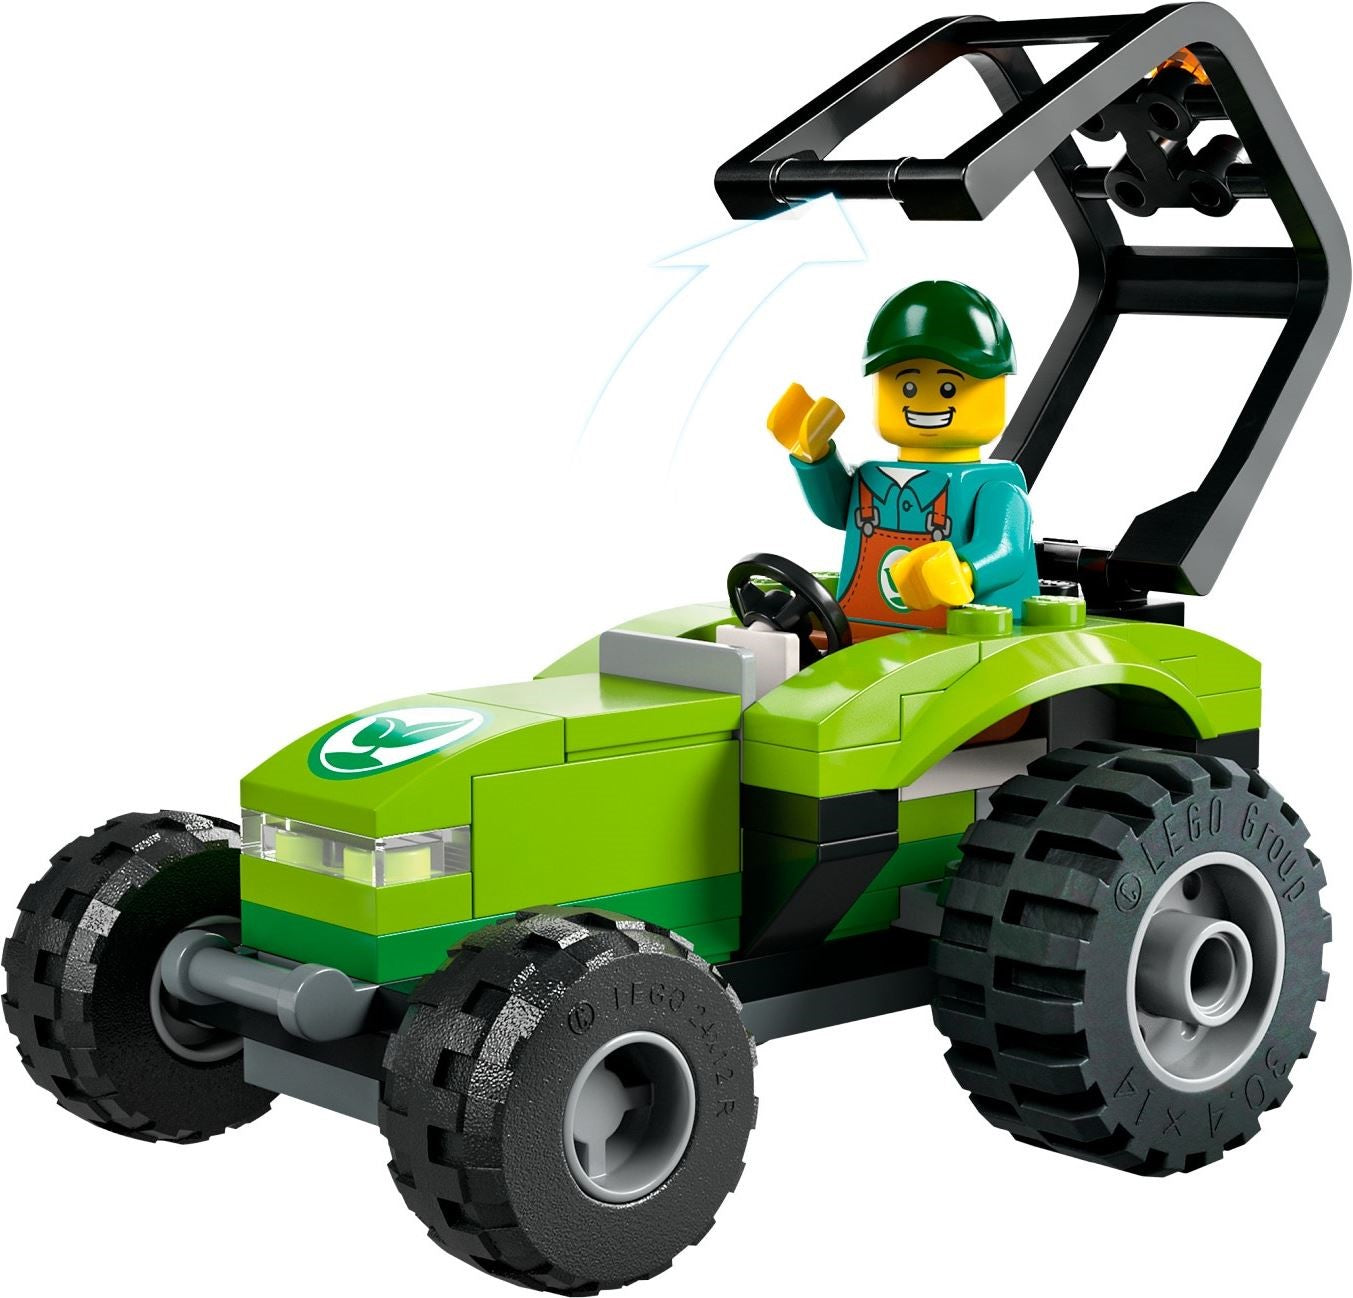 LEGO 60390 Park Tractor